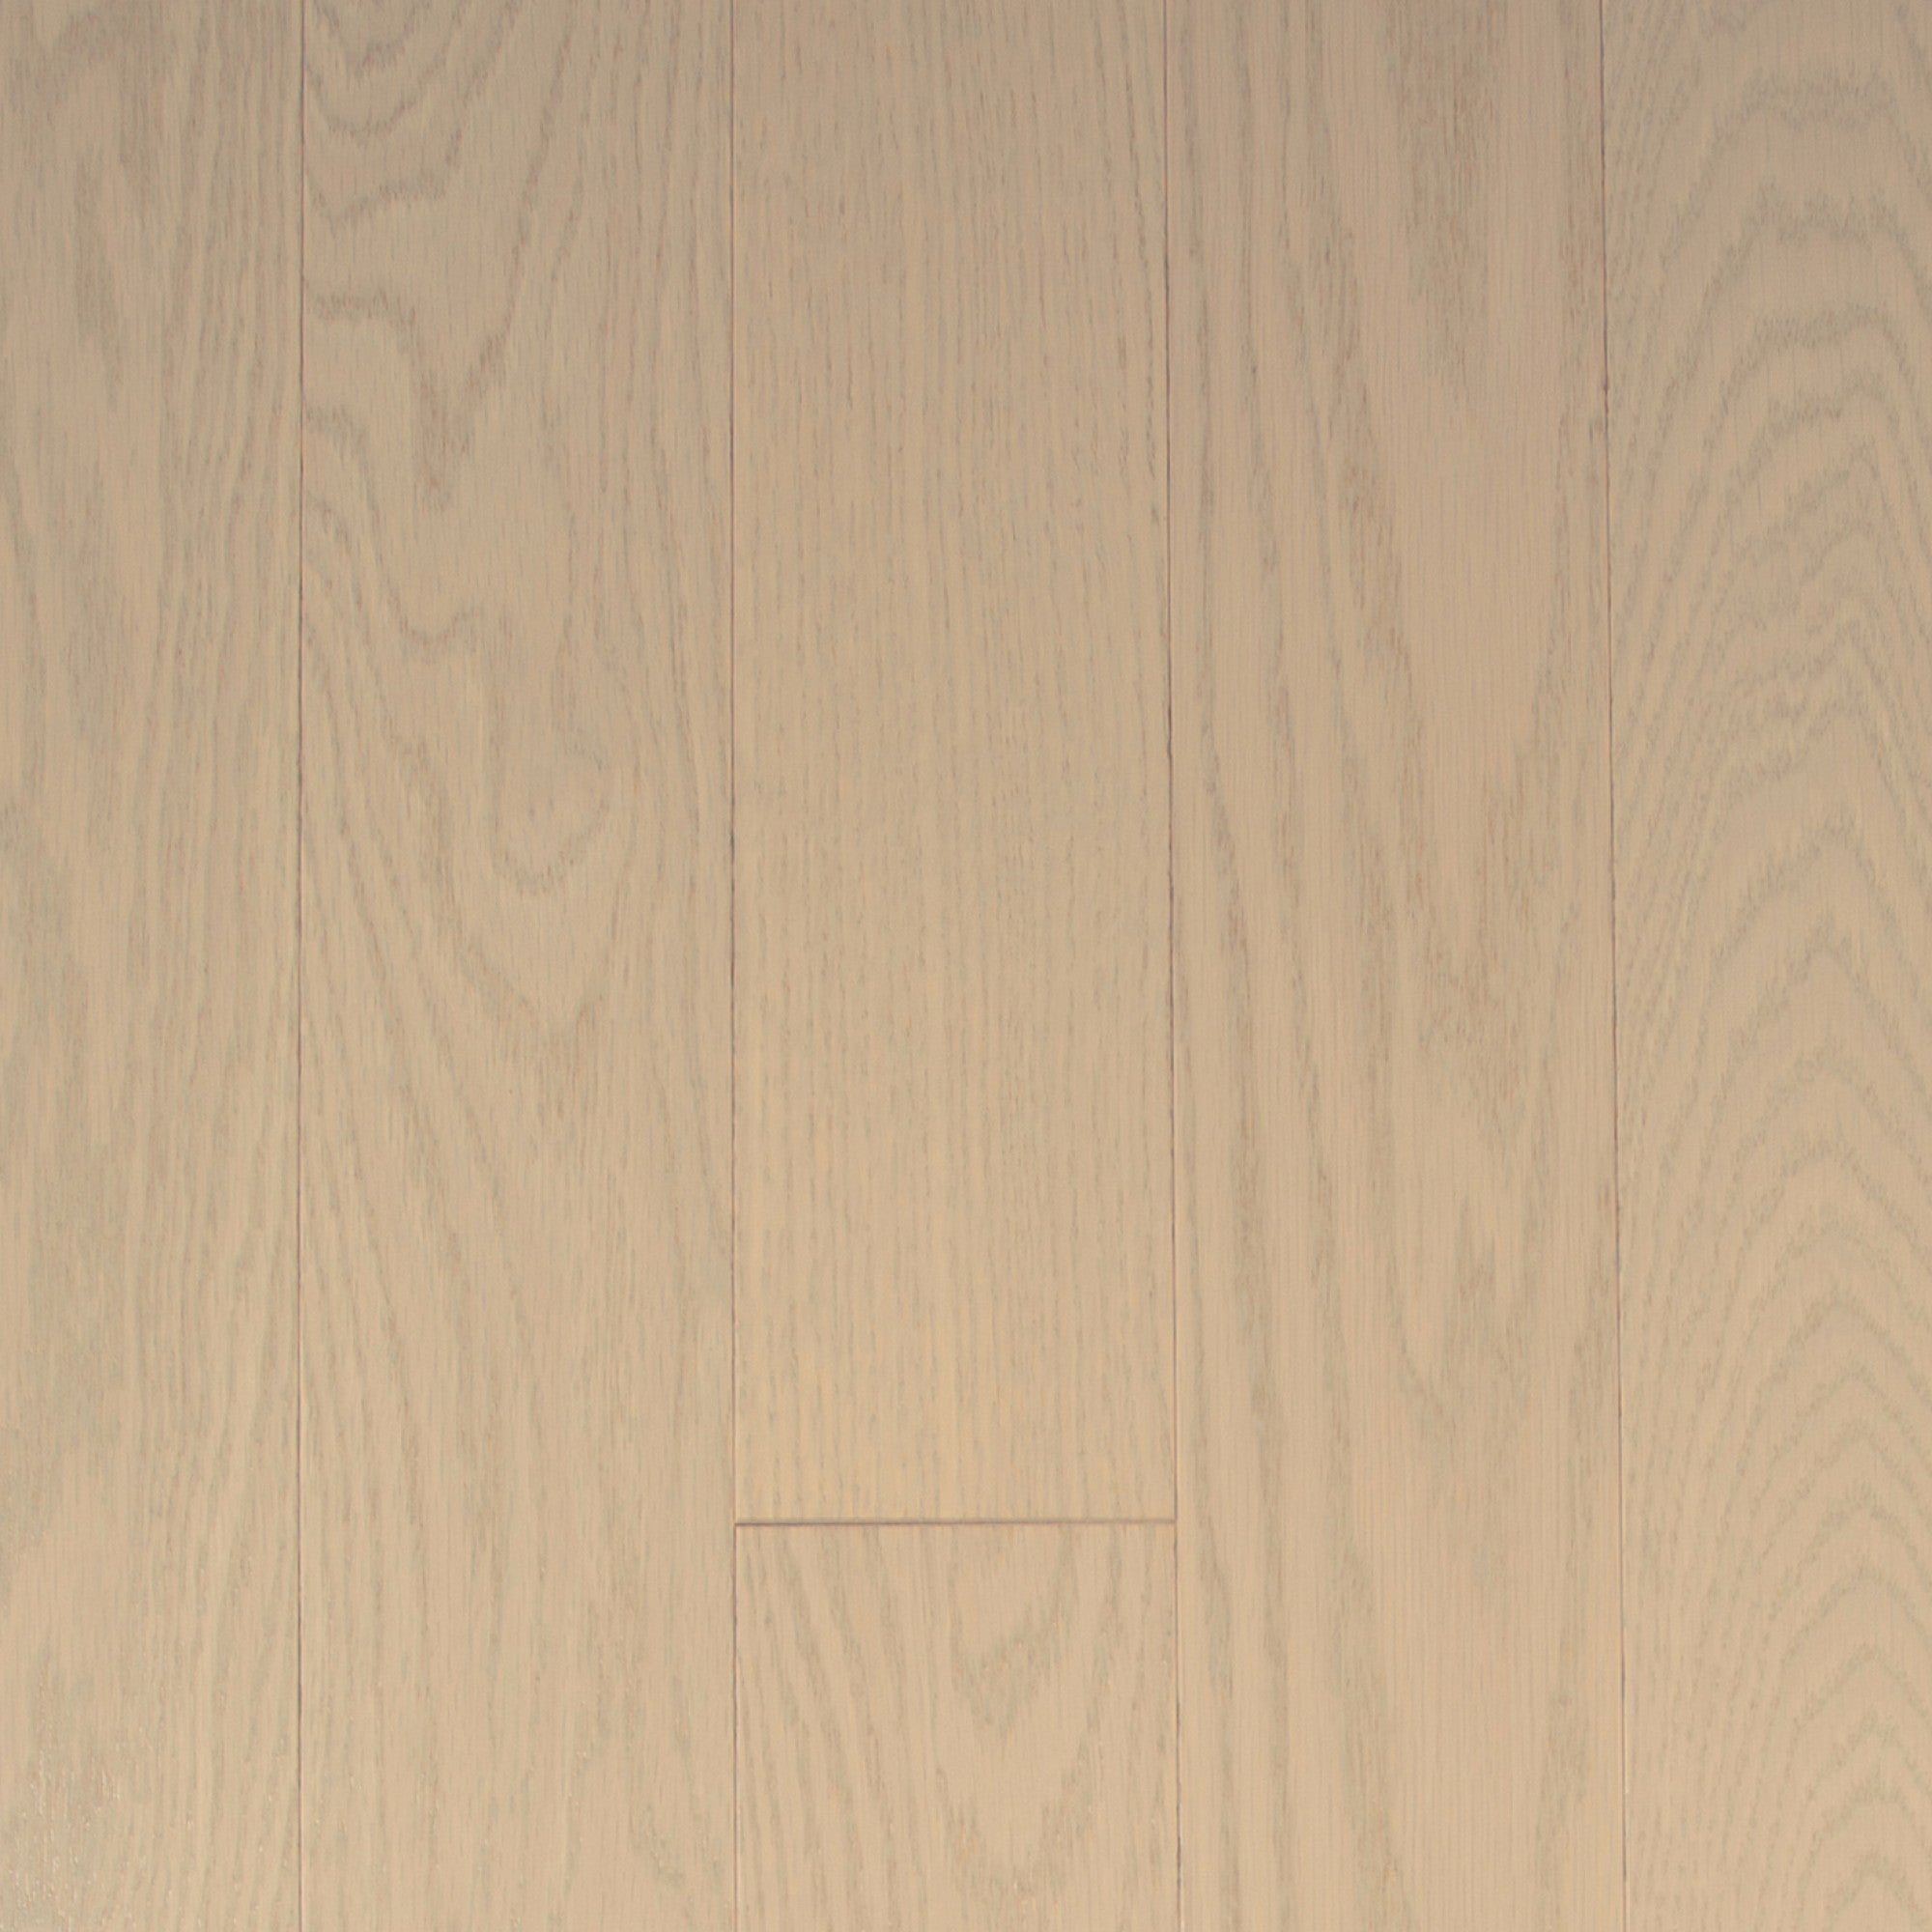 Vintage Northern Solid Sawn Red Oak Oasis Smooth 7 3/4" x 3/4" Pearl Low Sheen Character Grade